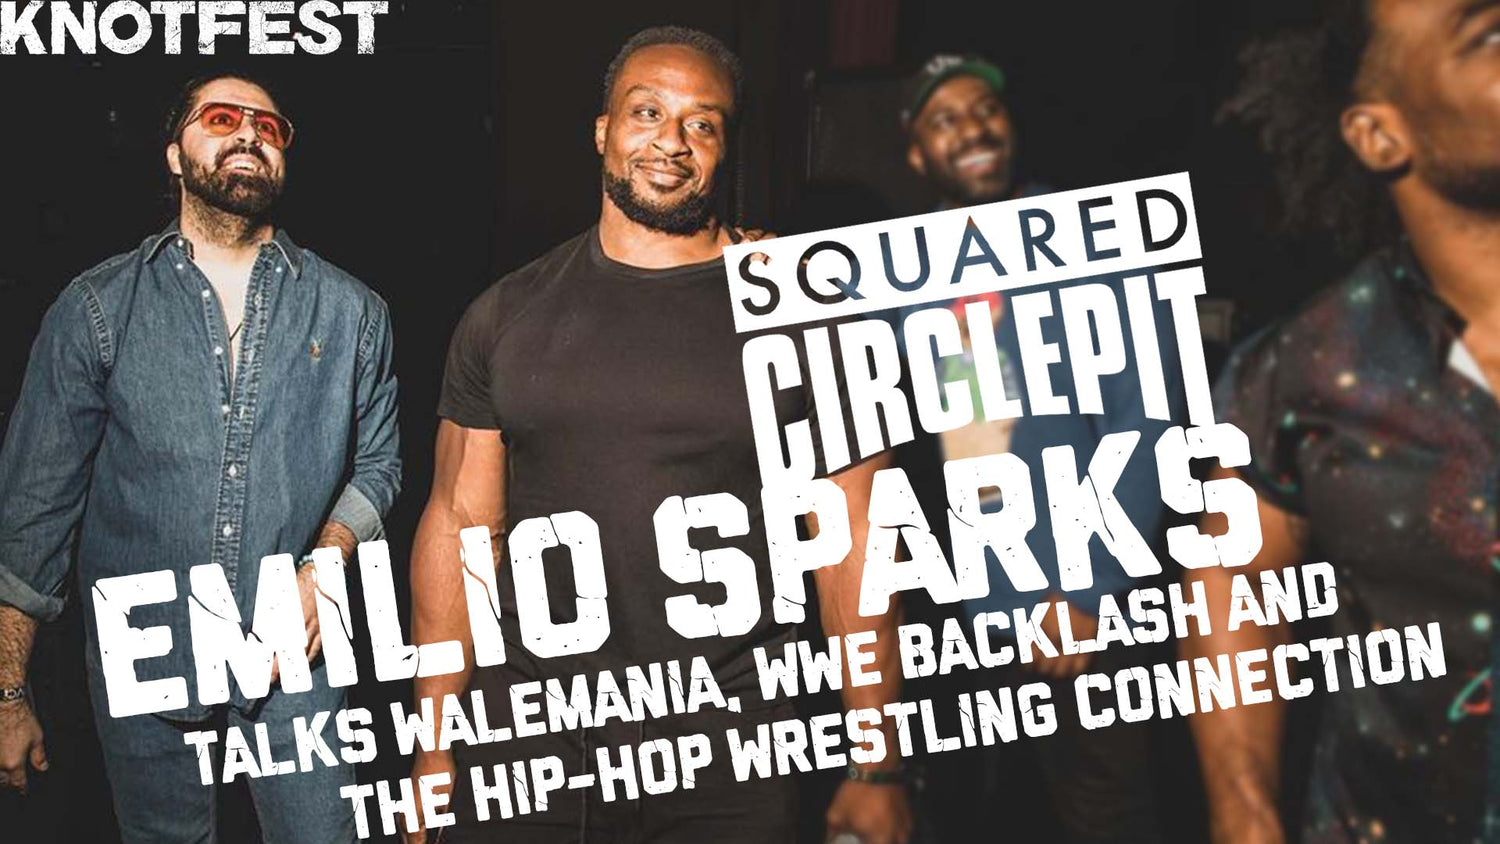 Squared Circle Pit - Emilio Sparks Talks WWE Backlash, WaleMania and the Hip-Hop Wrestling Connection